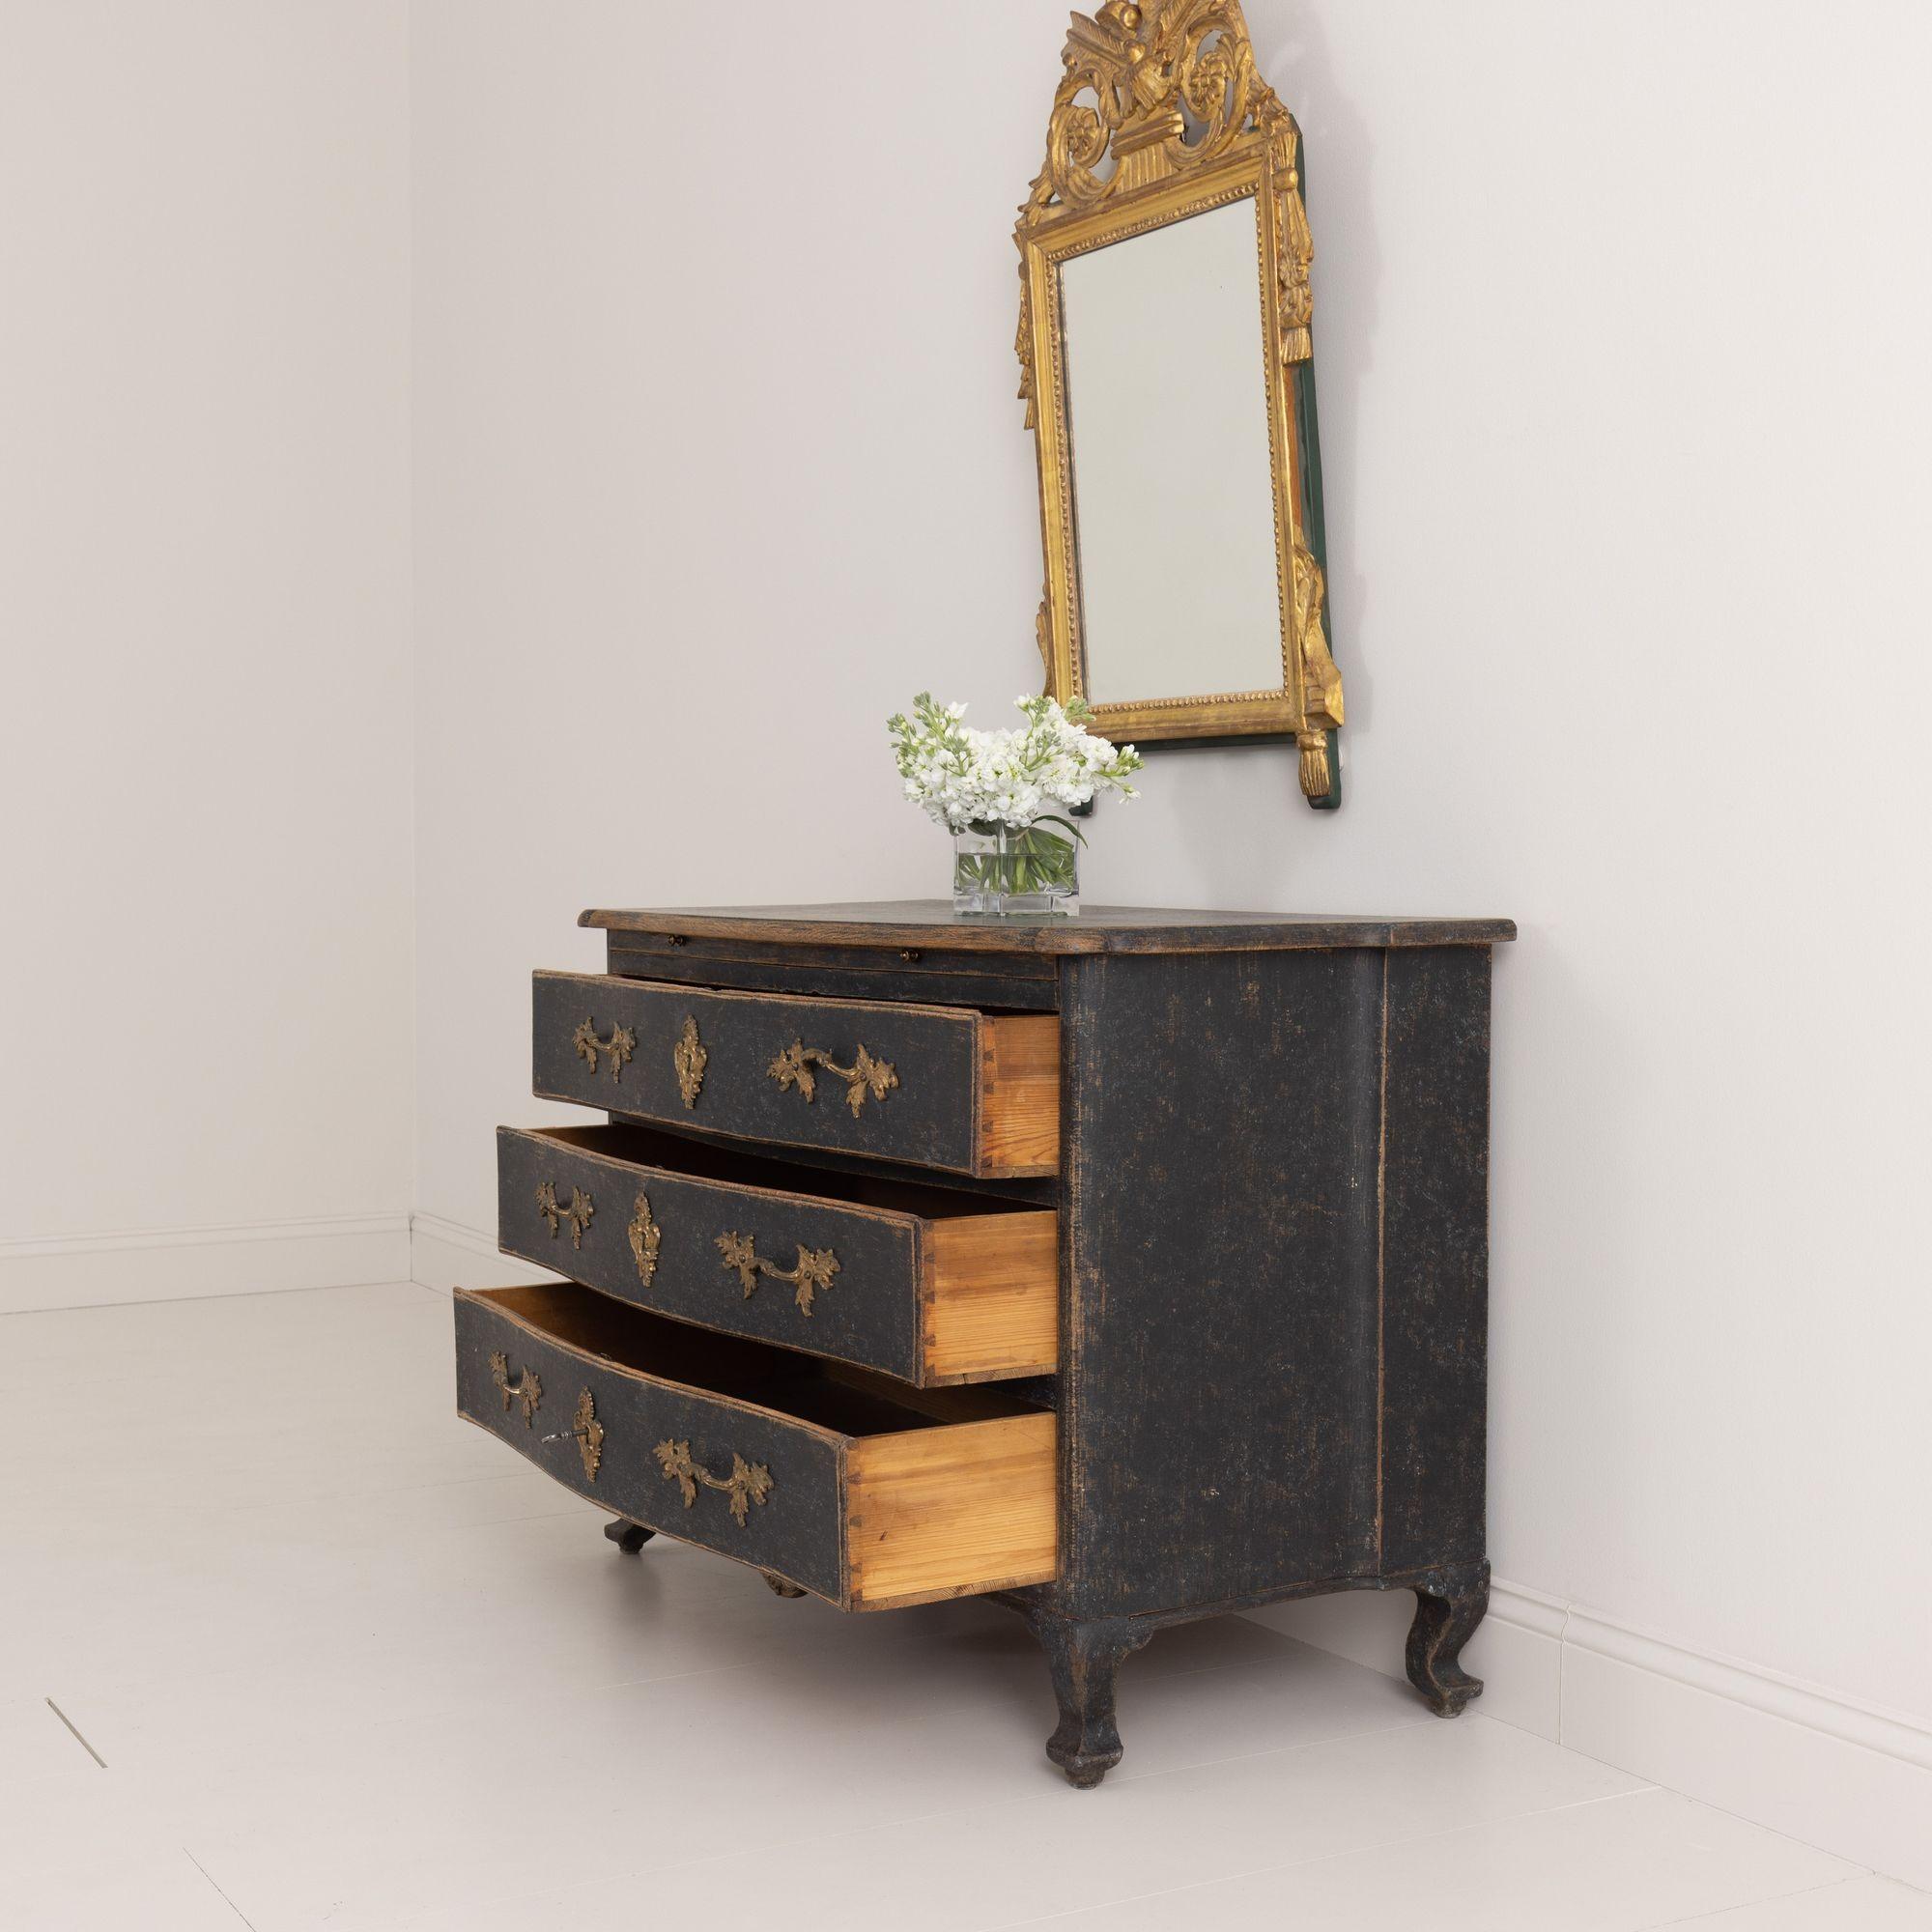 18th C. Swedish Rococo Period Black Painted Commode with Original Brass Hardware For Sale 3